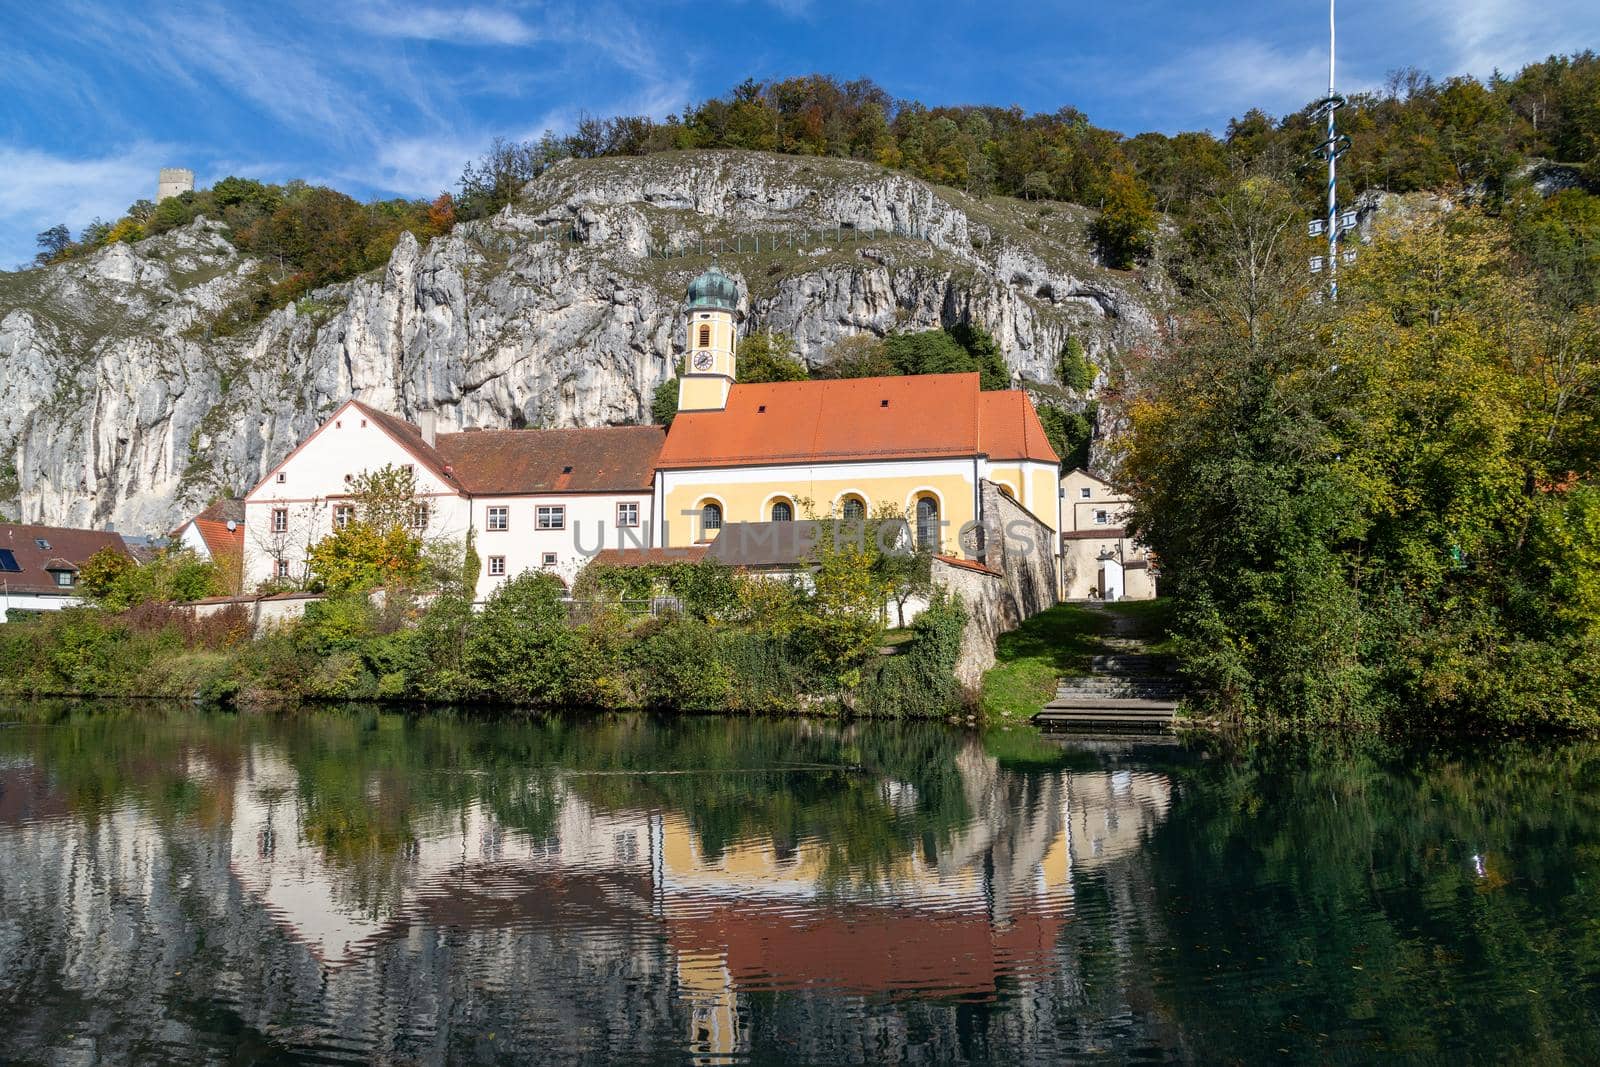 Idyllic view at the village Markt Essing in Bavaria, Germany with the Altmuehl river and high rocks on a sunny day in autumn